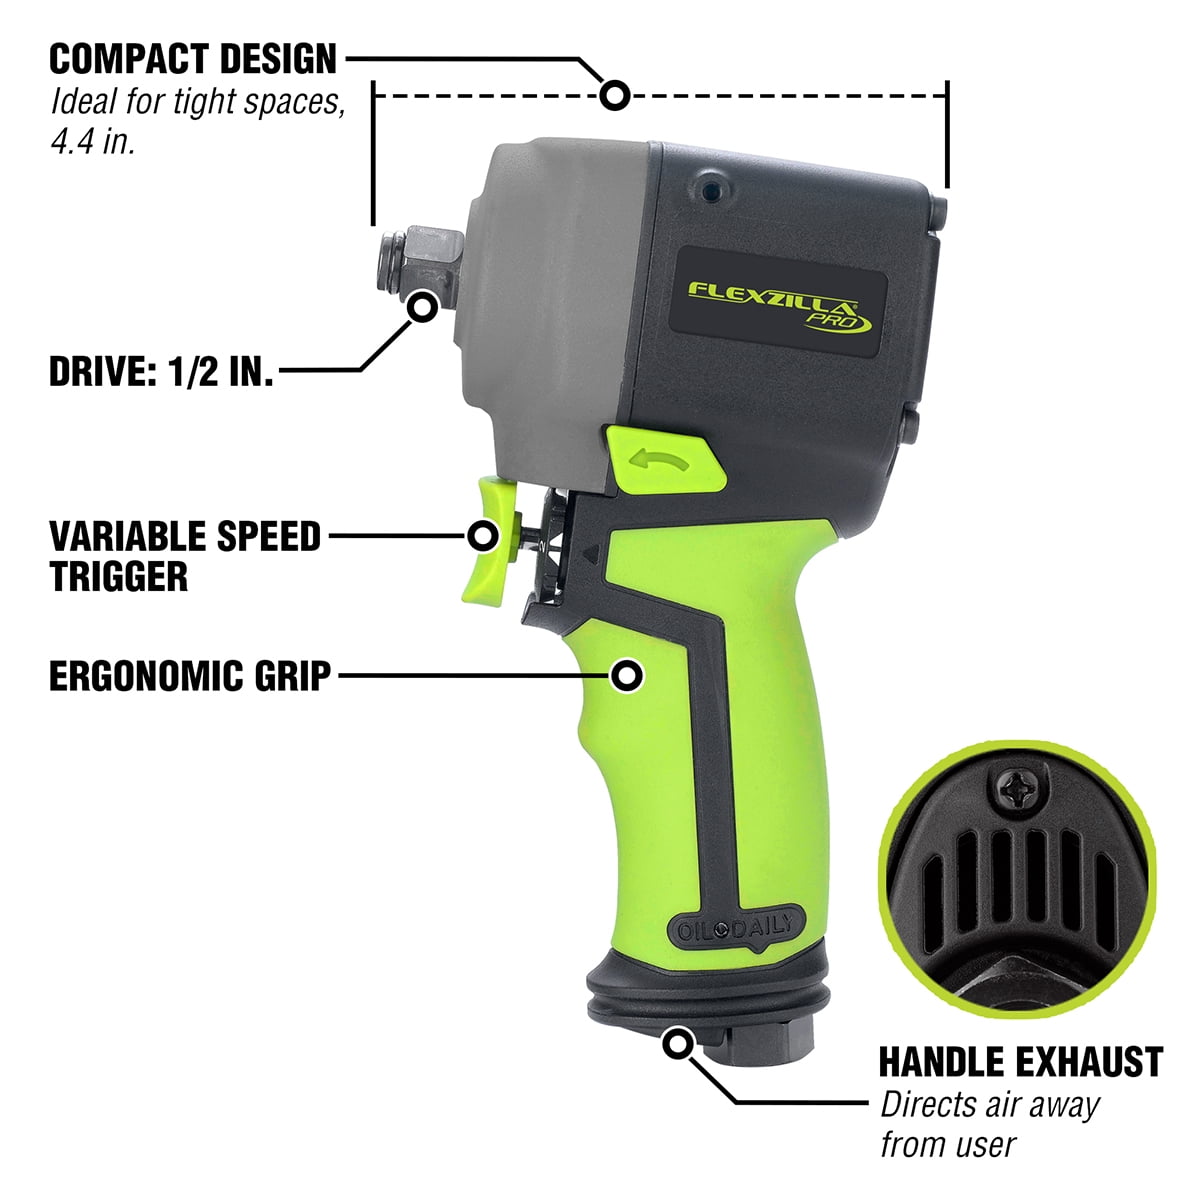 FLEXZILLA 1/2" DRIVE Model AT1470FZ compact mini IMPACT WRENCH by LEGACY 